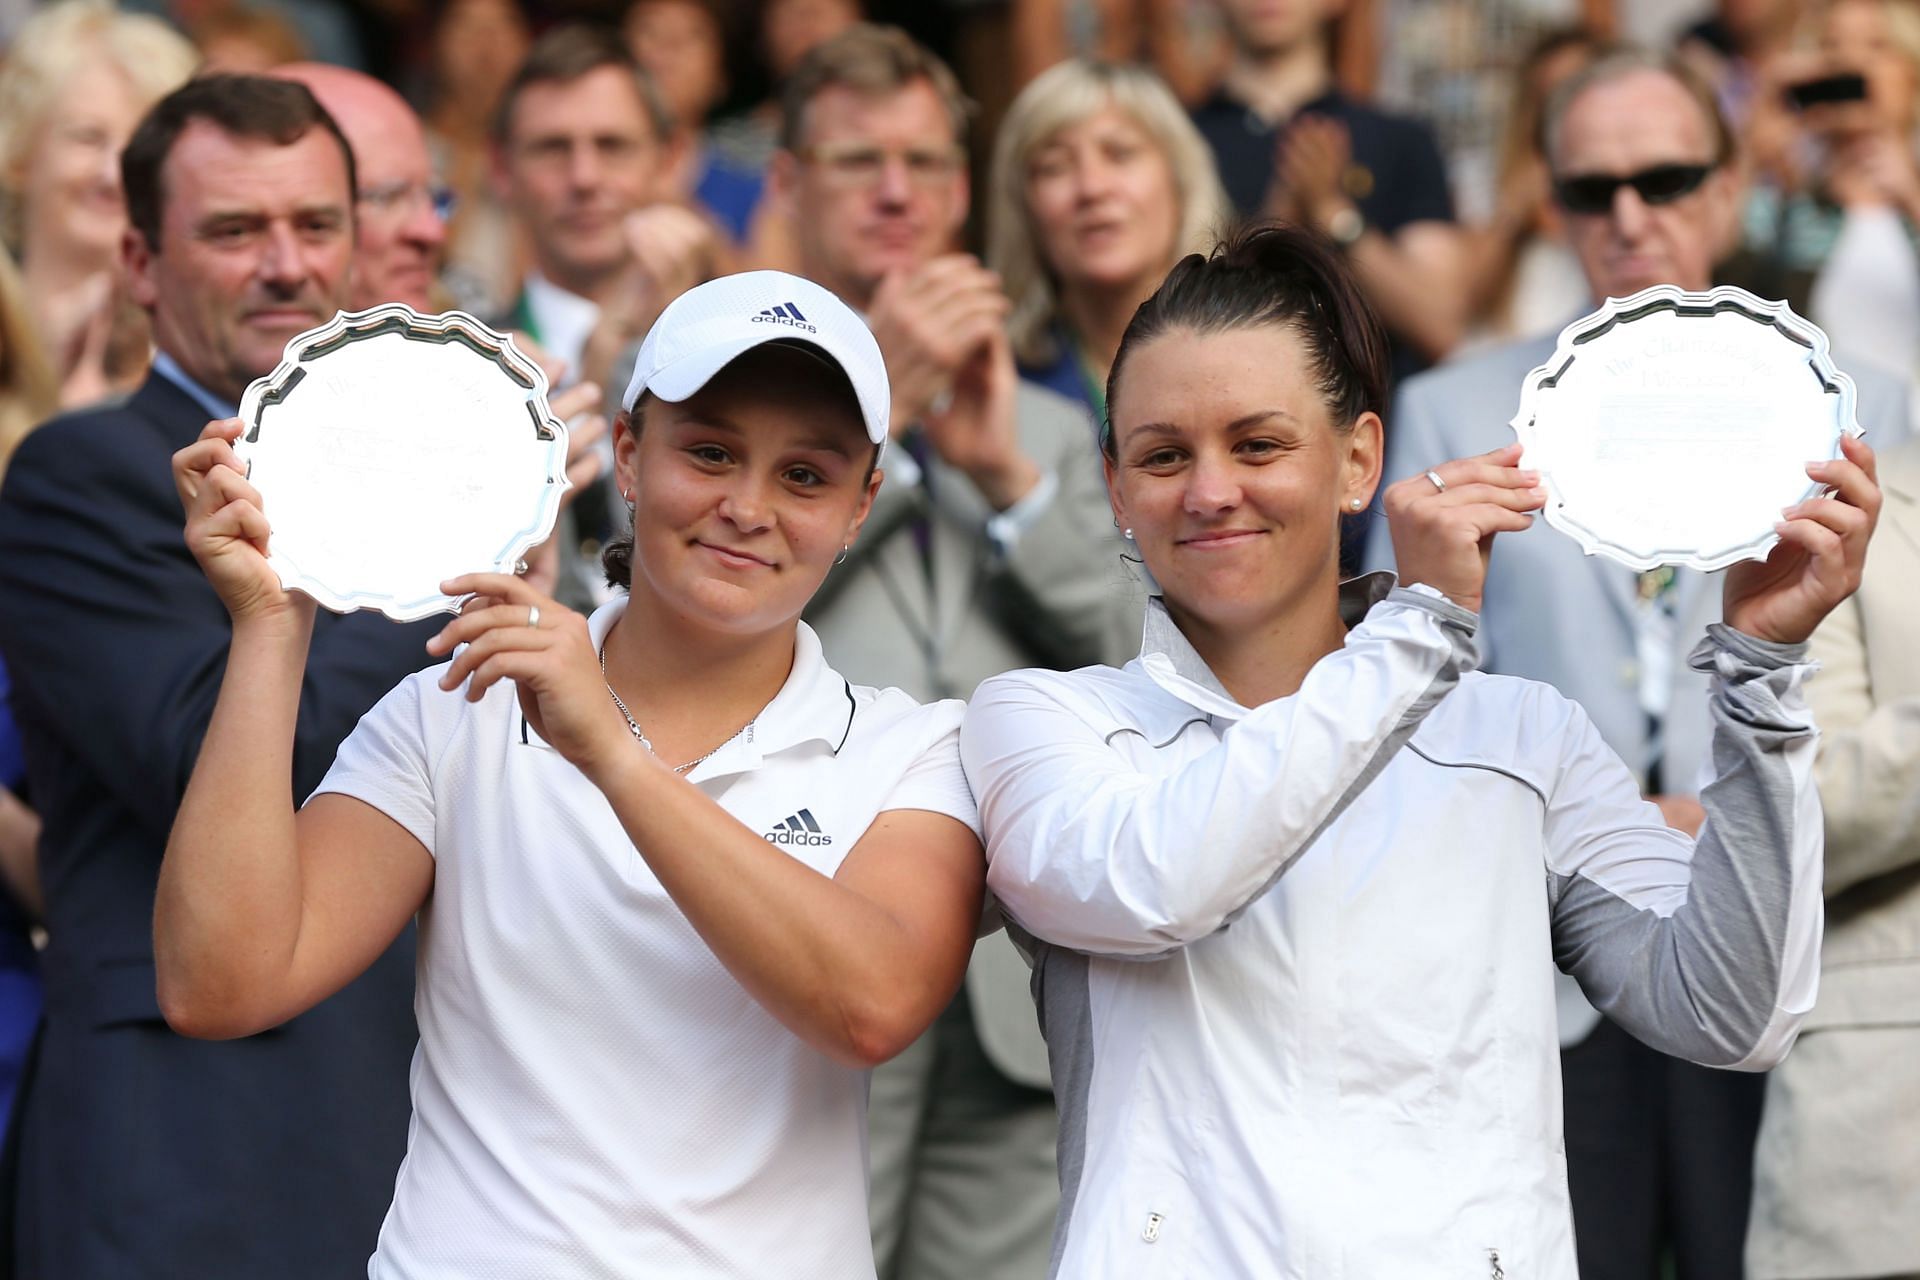 Ashleigh Barty (L) and Casey Dellacqua at the 2013 Wimbledon Championships